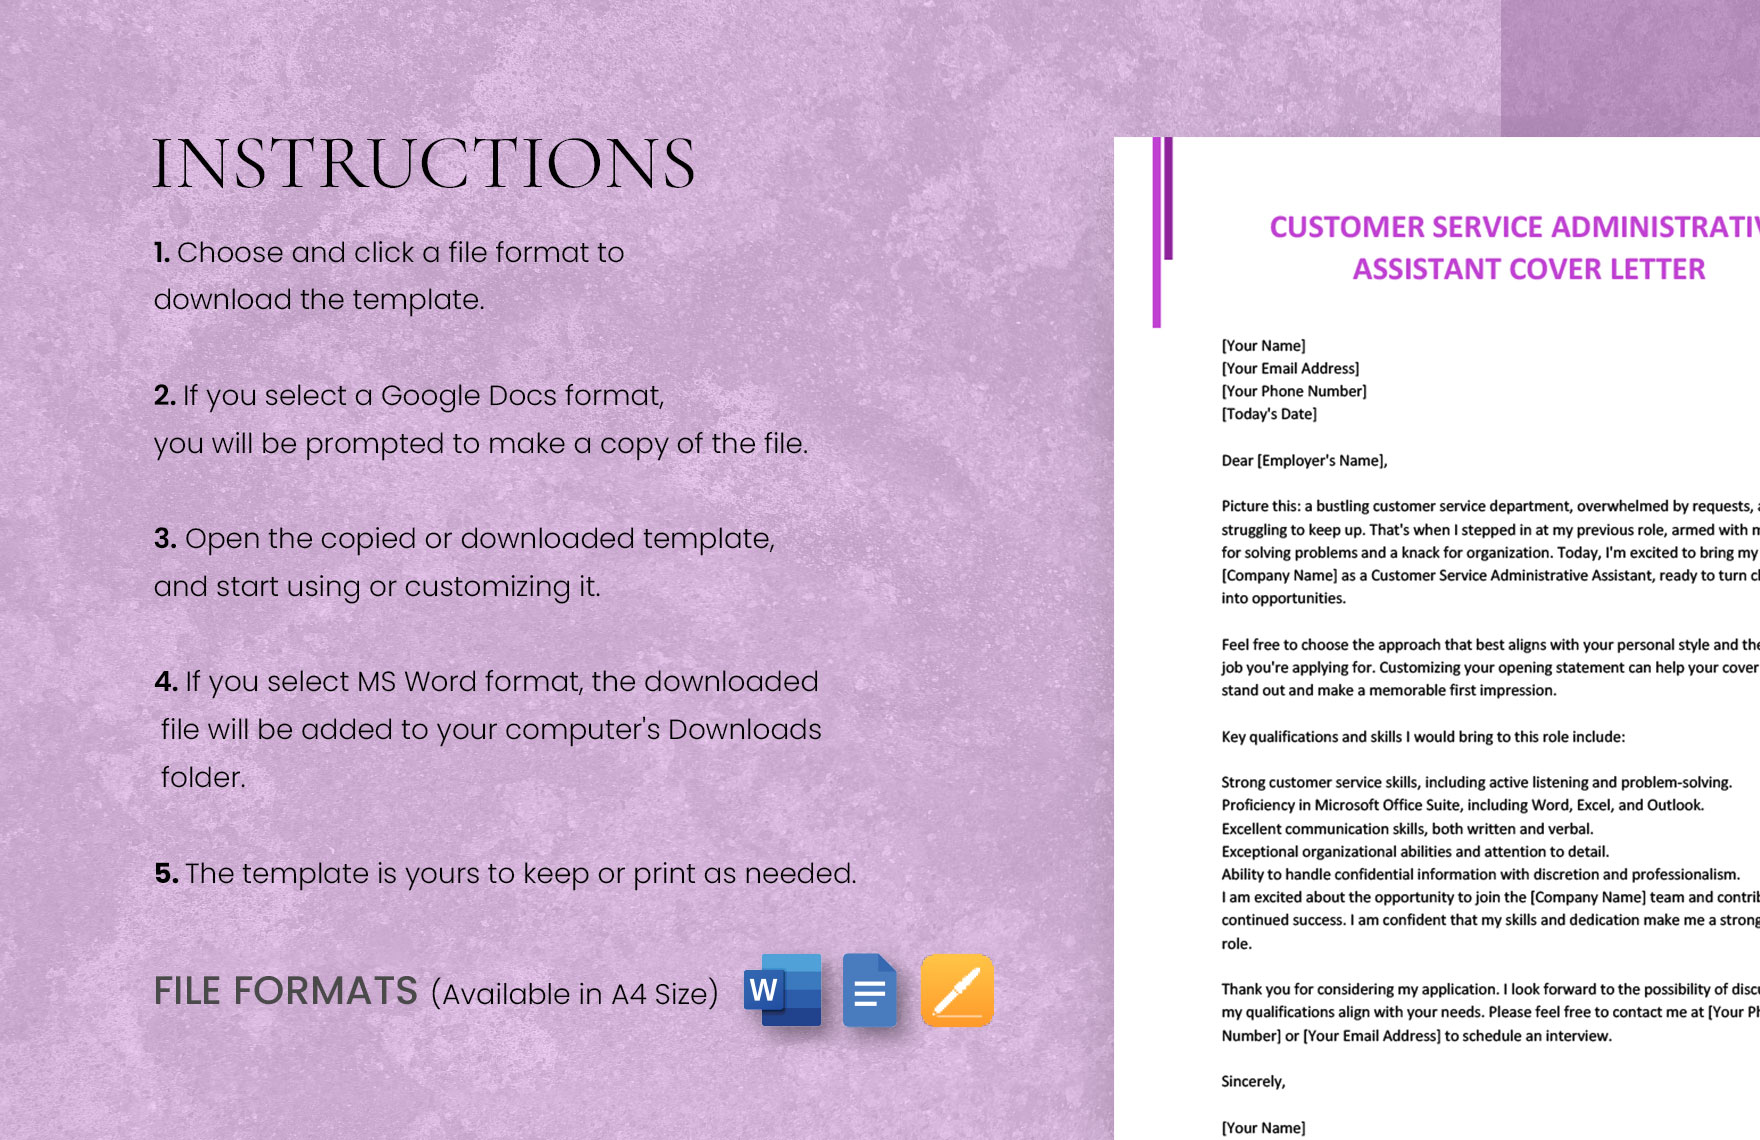 Customer Service Administrative Assistant Cover Letter